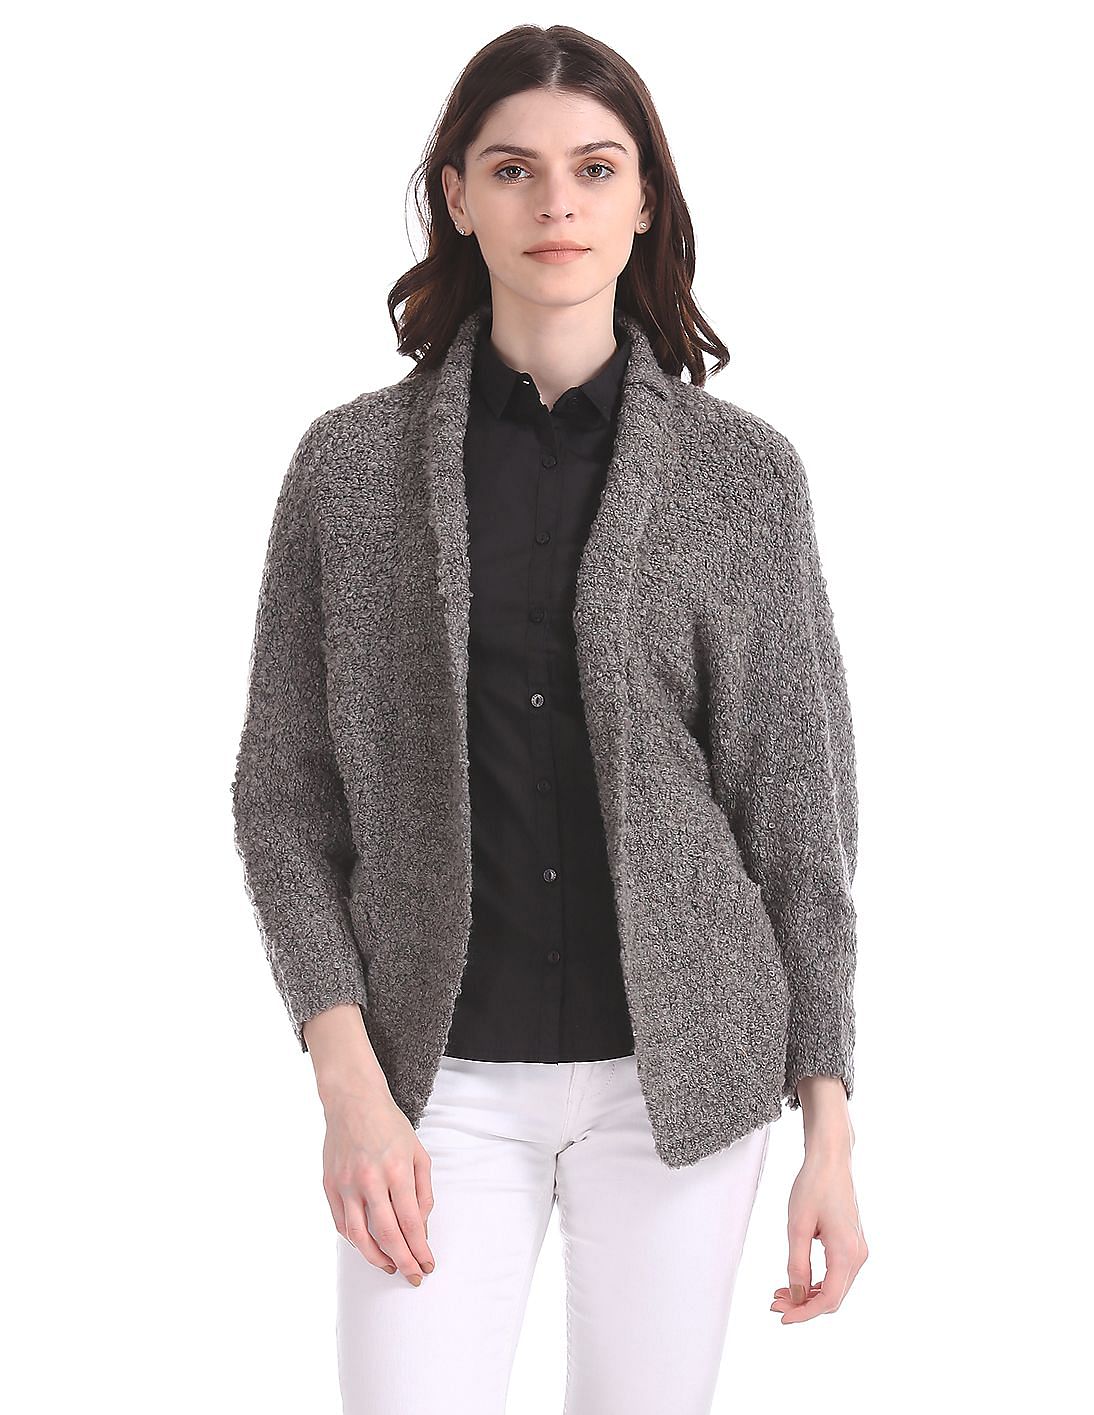 Buy Women Textured Weave Open Front Shrug online at NNNOW.com